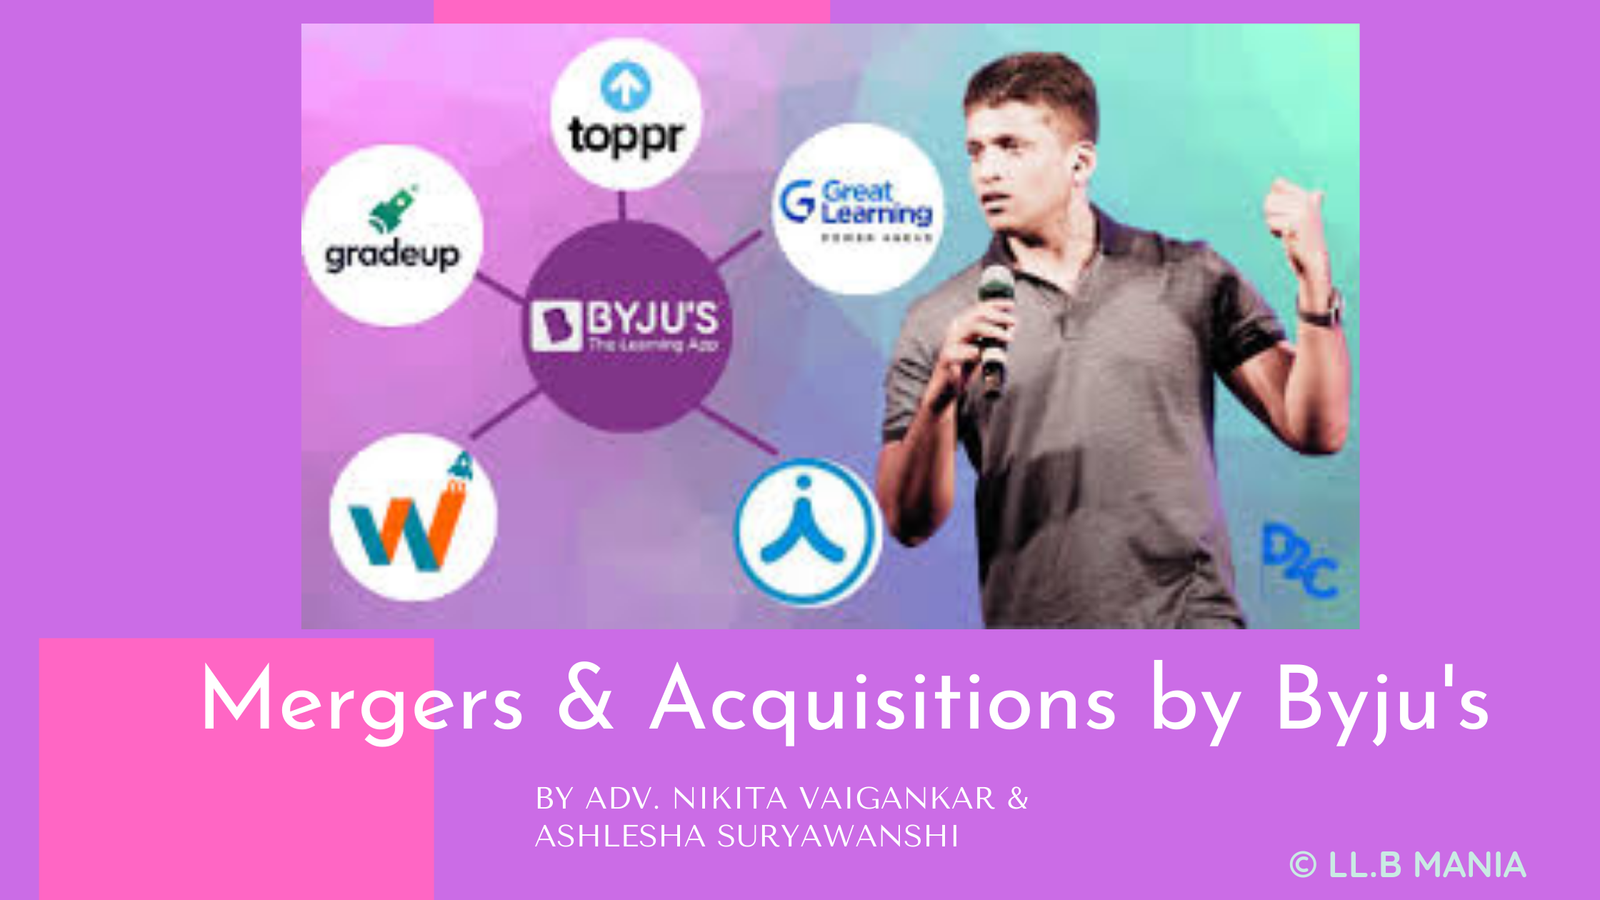 Mergers & Acquisitions by Byju’s